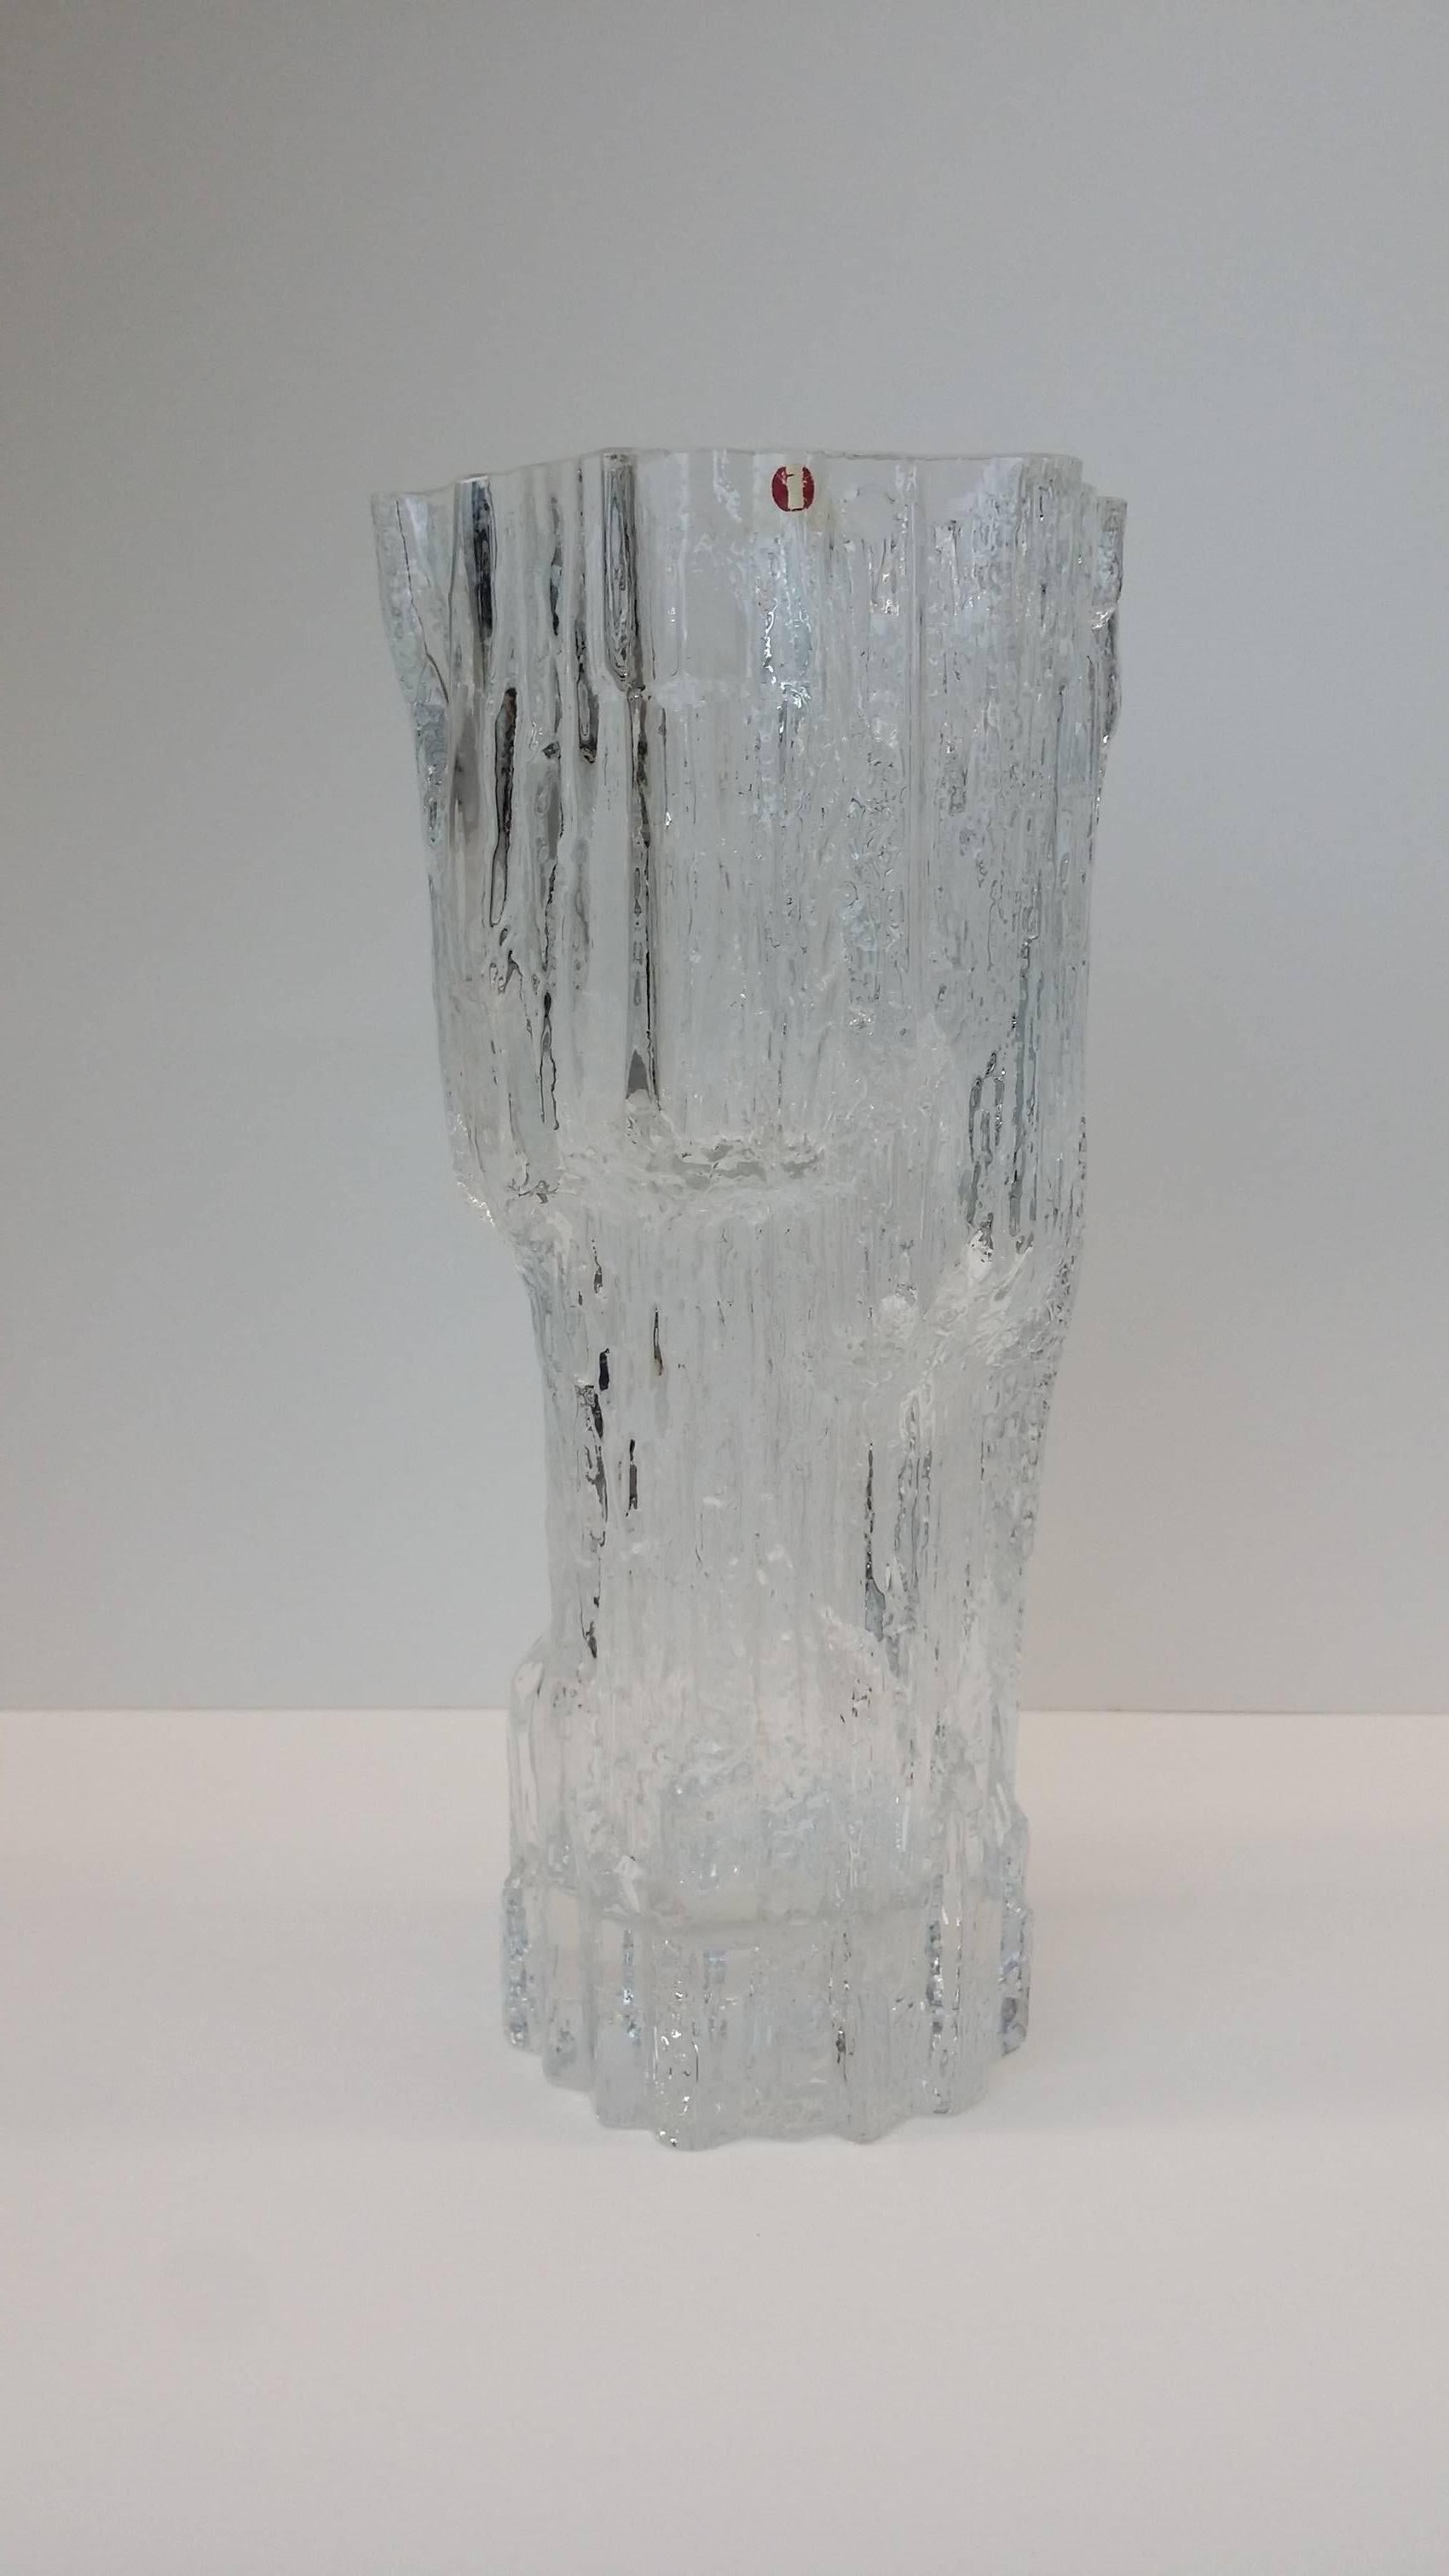 Tapio Wirkkala for Iittala Icicle vase.

* Free shipping at full price only.